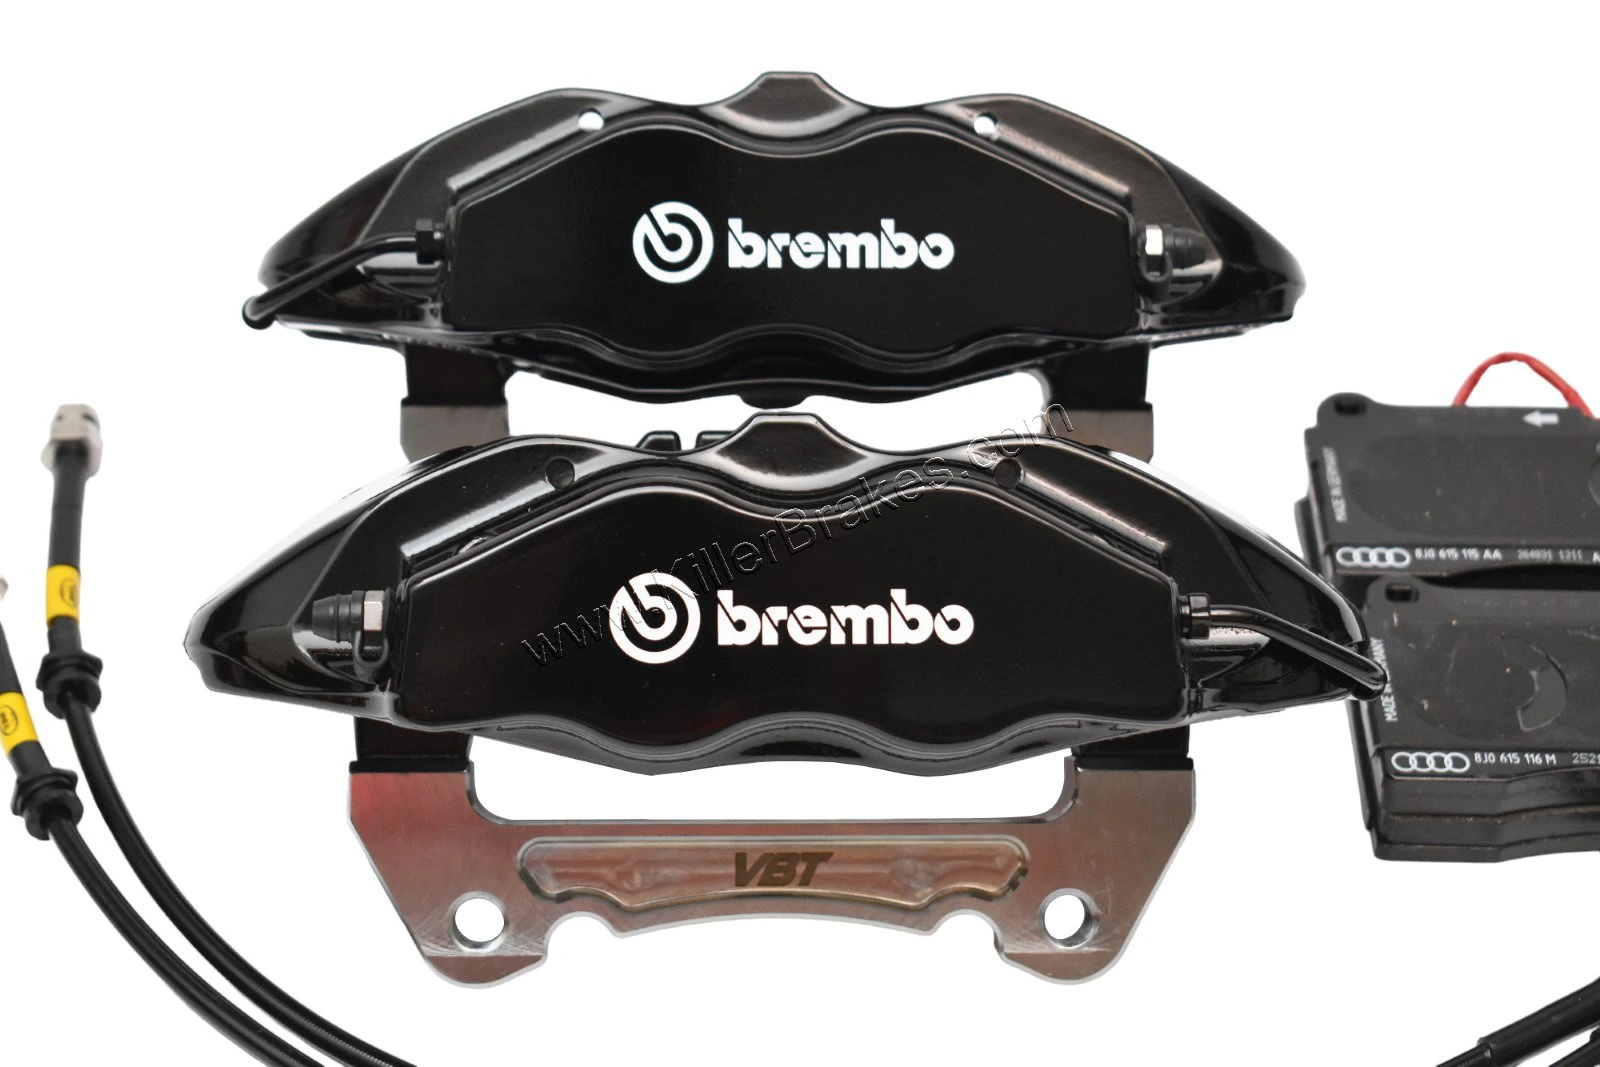 Front Cupra Performance Pack Brembo 4pot Brake Calipers 340mm 345mm Adapters VBT 5F0615105 5F0615106 Black New